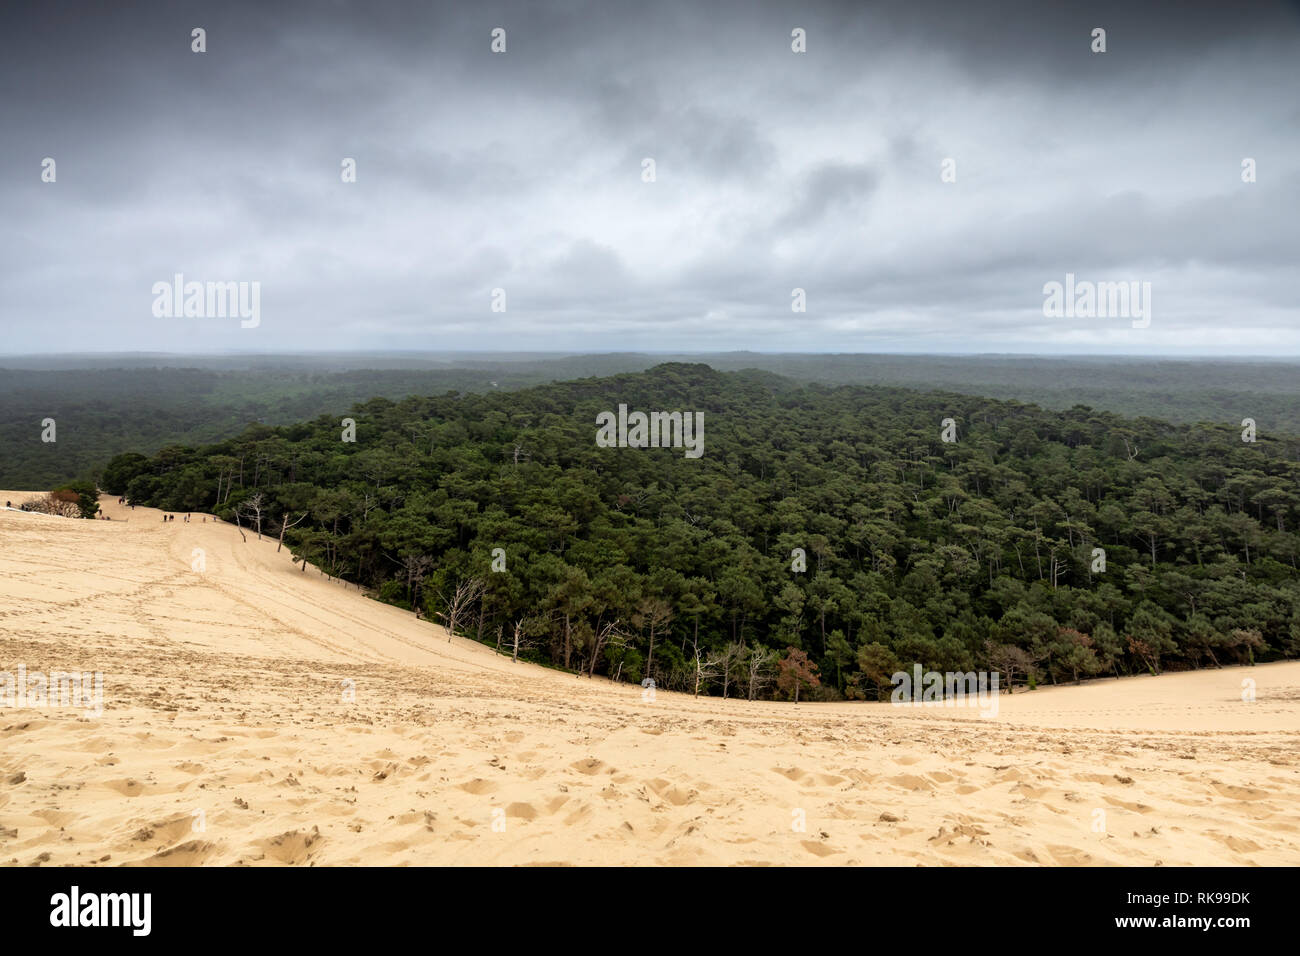 The Dune of Pilat The the tallest sand dune in Europe located in La Teste-de-Buch in the Arcachon Bay area France,  60 km from Bordeaux Stock Photo